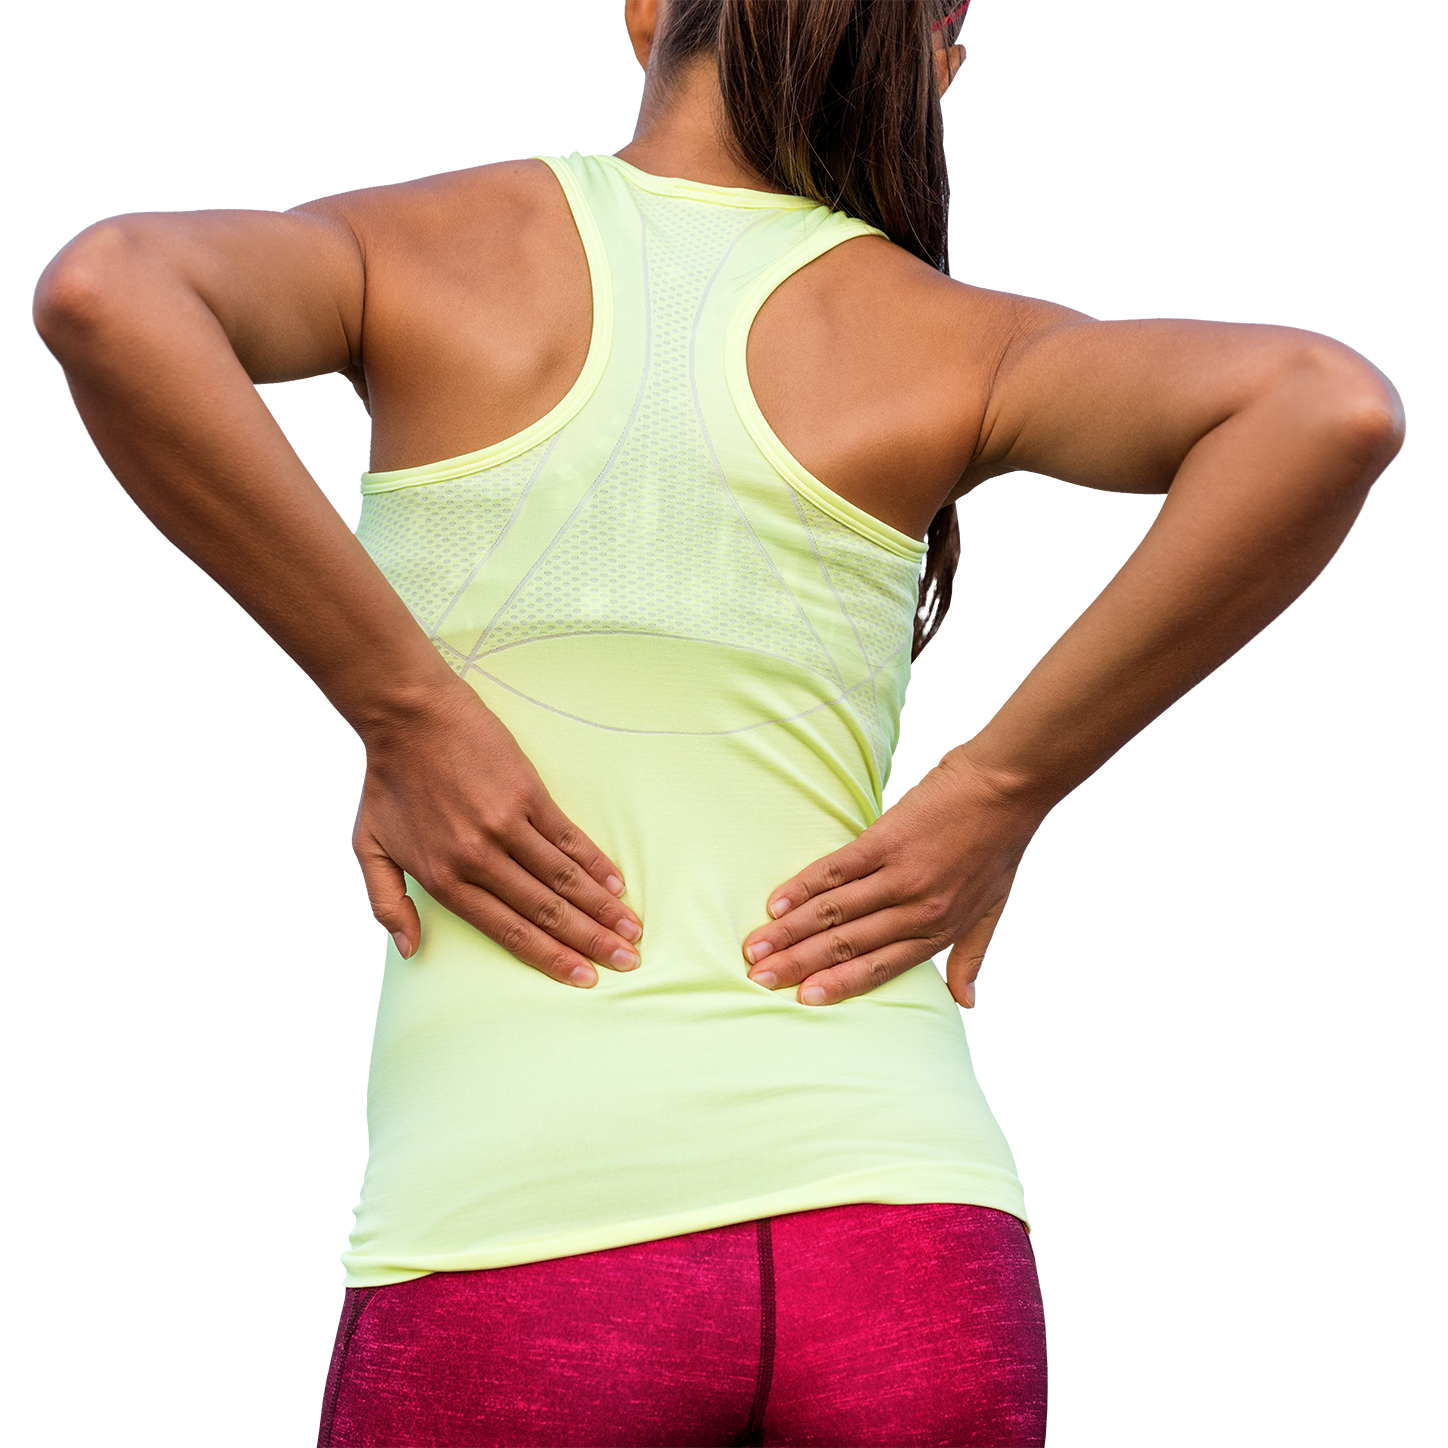 services for back pain in naples